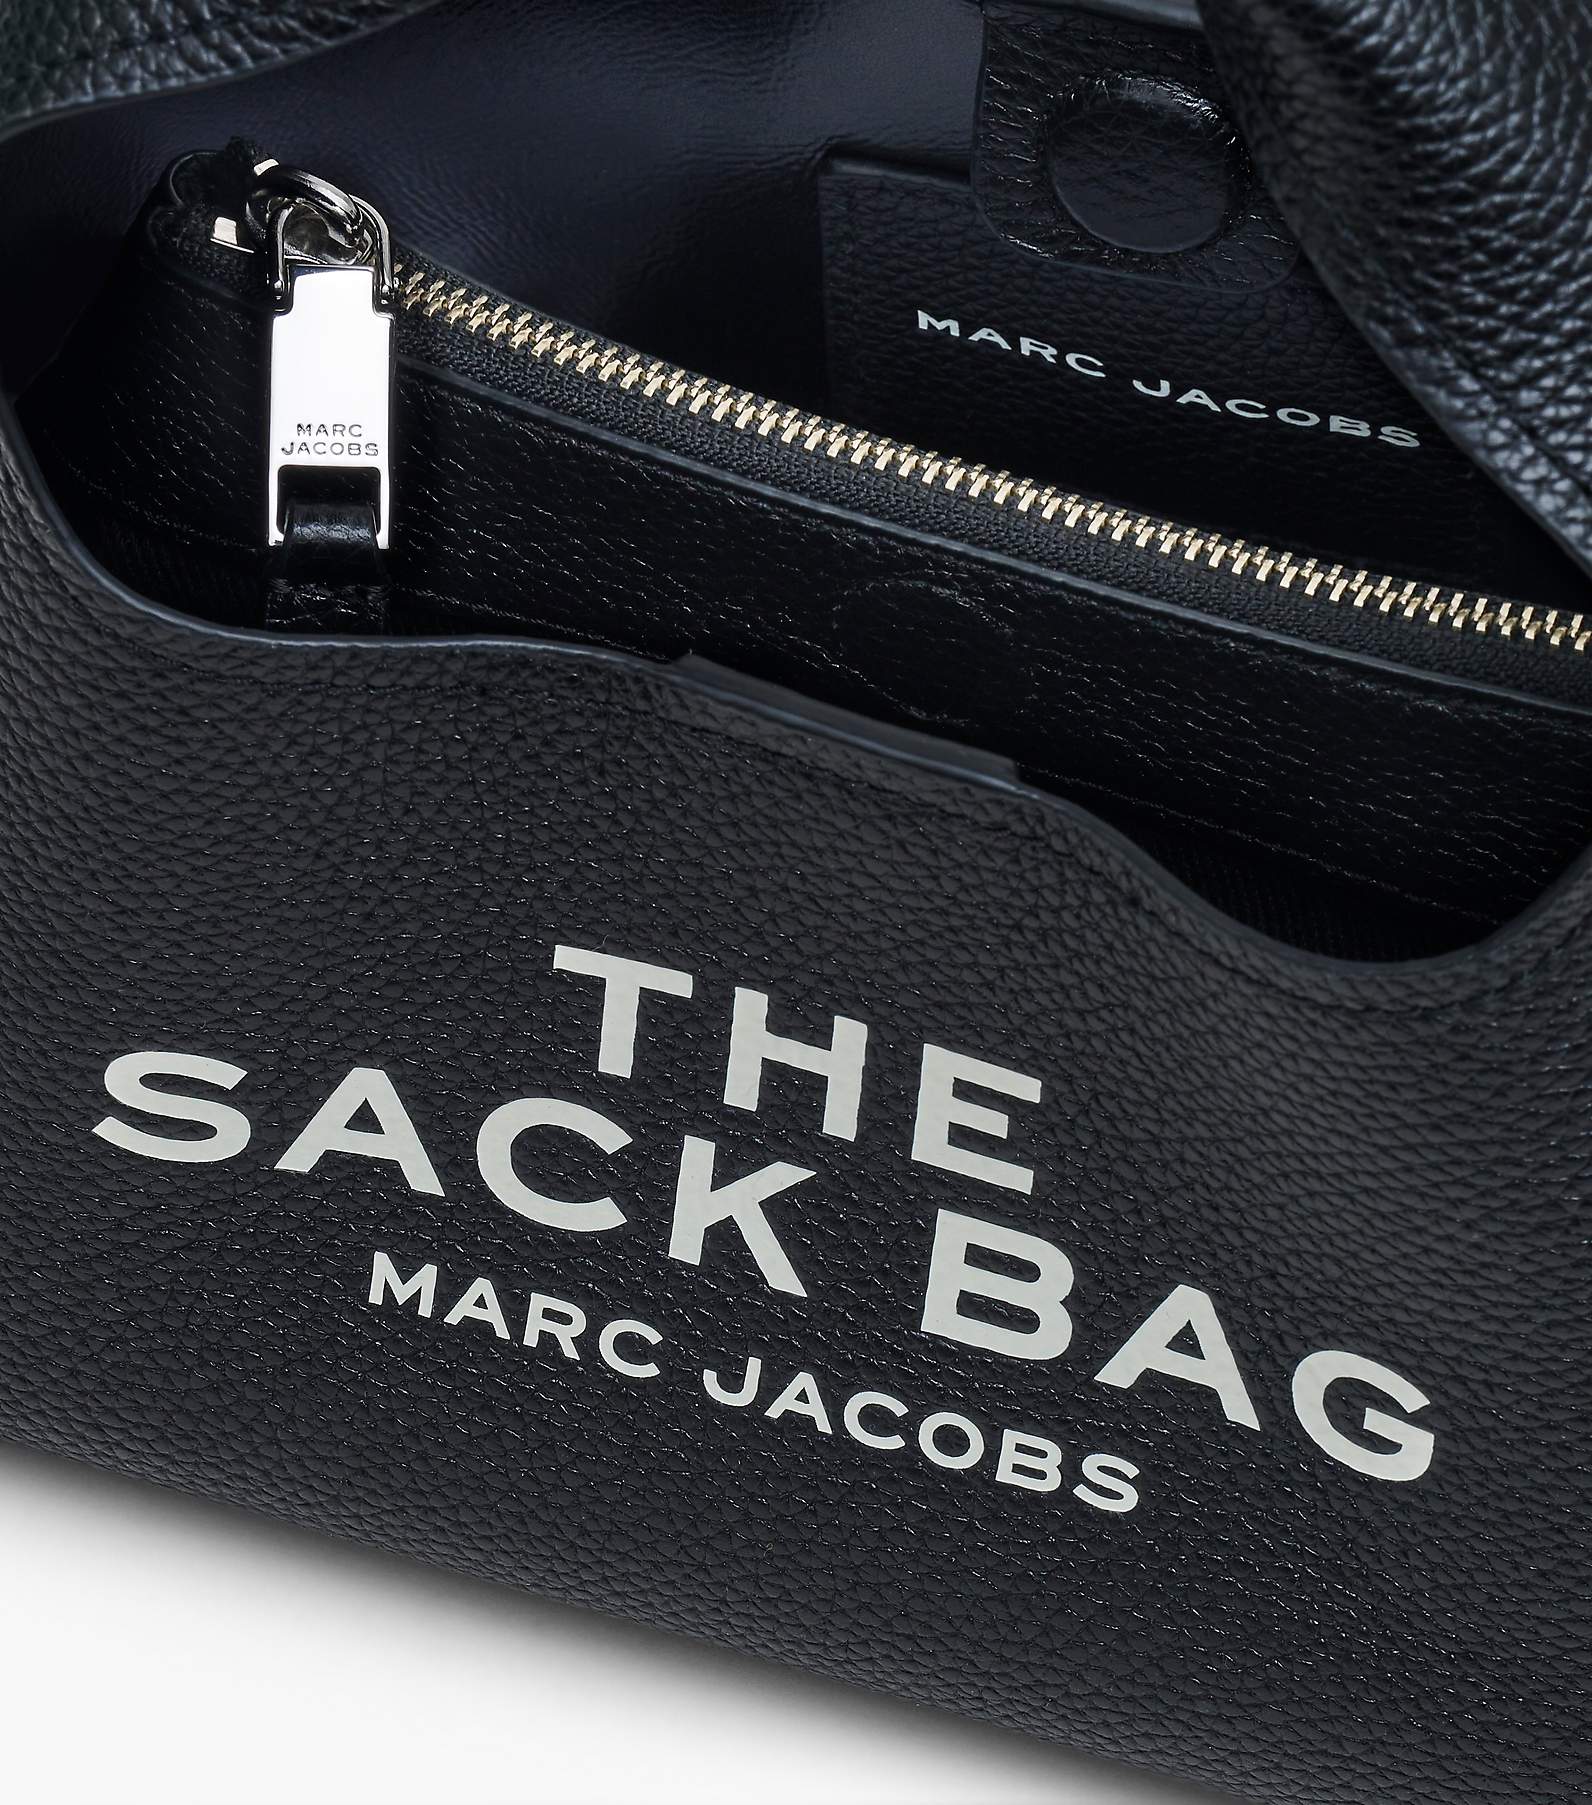 the marc jacobs bag